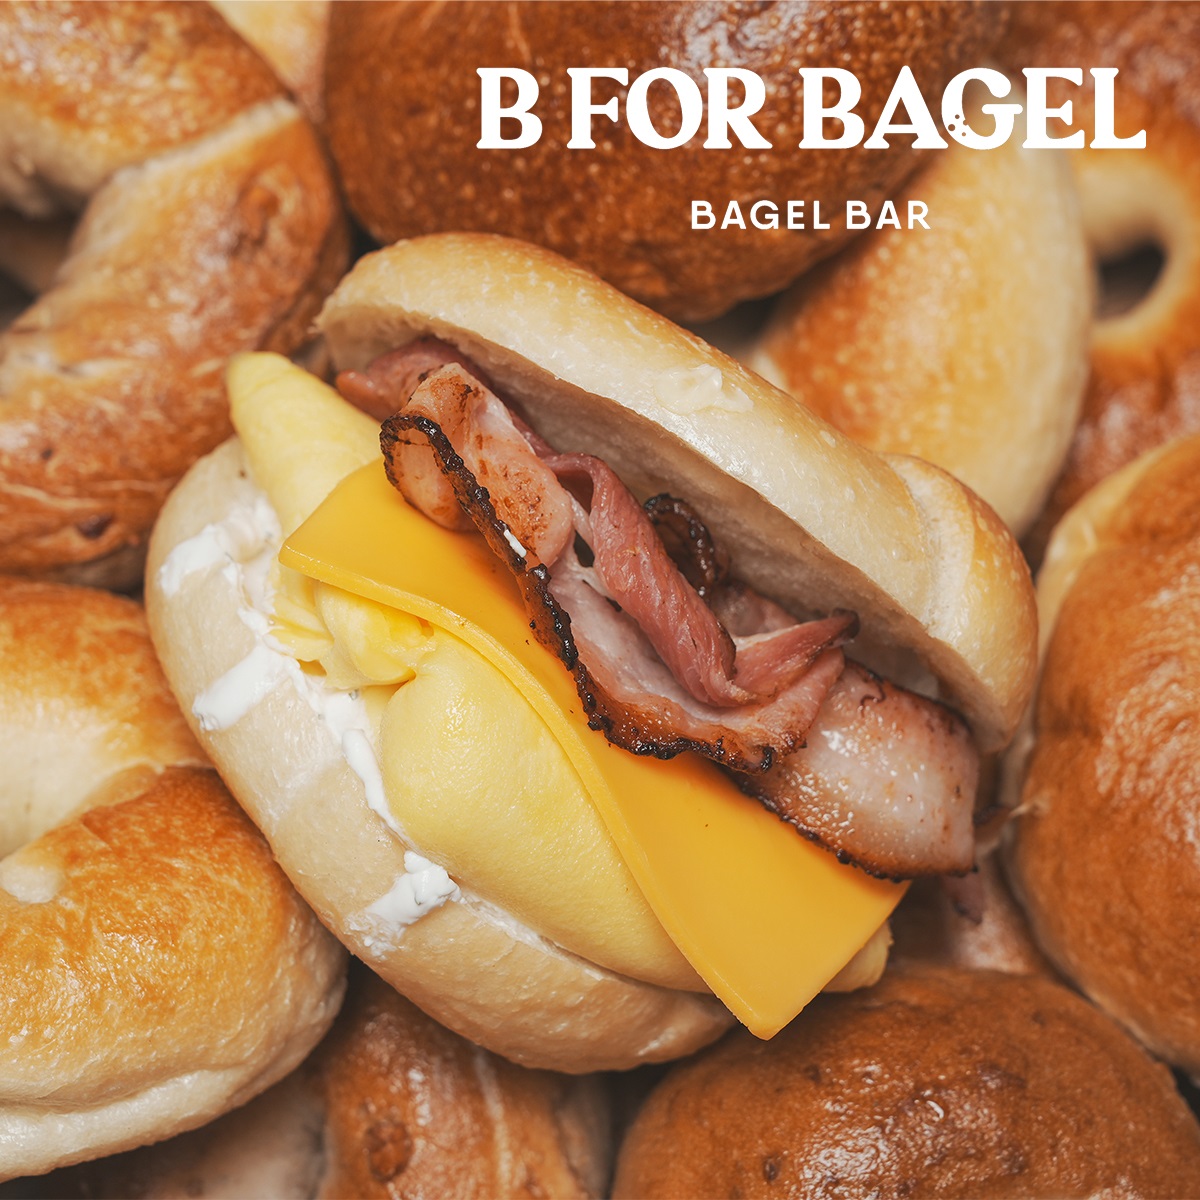 B for Bagel